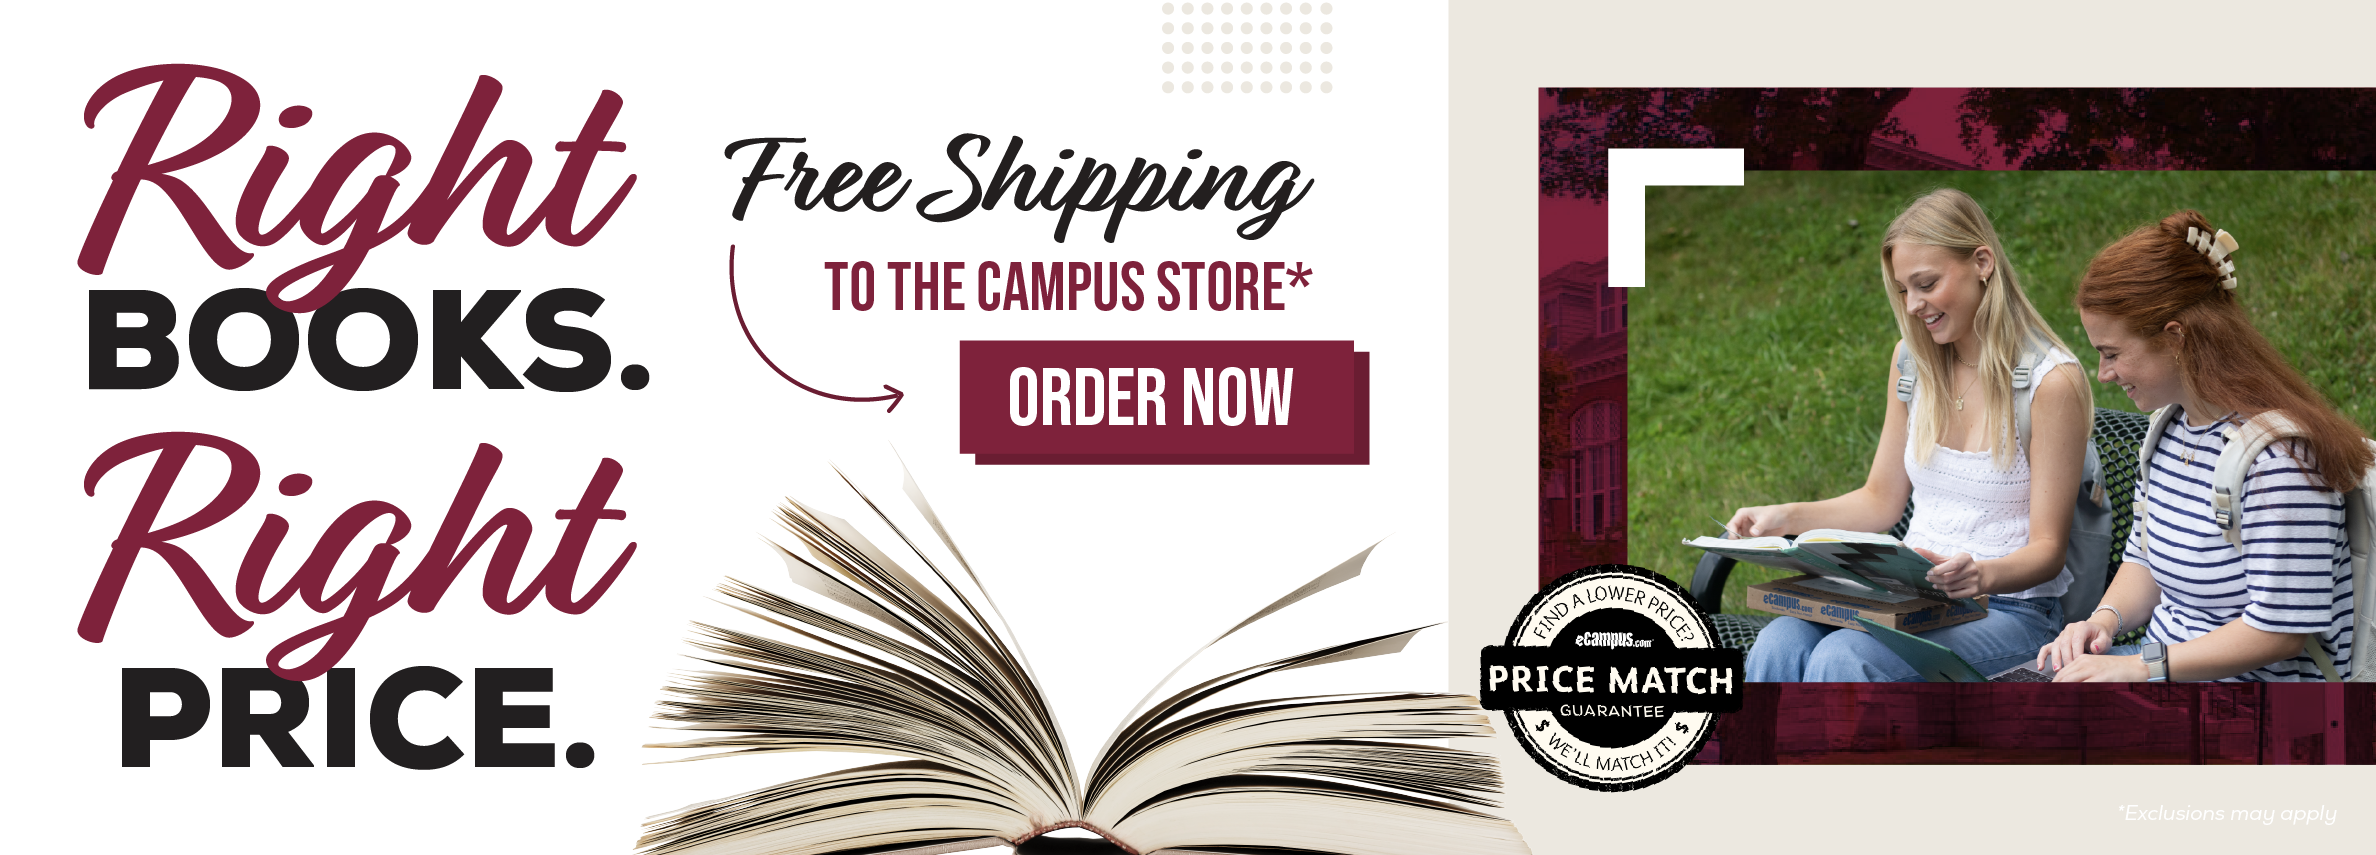 Right books. Right price. Free shipping to the campus store.* Order now. Price Match Guarantee. *Exclusions may apply.